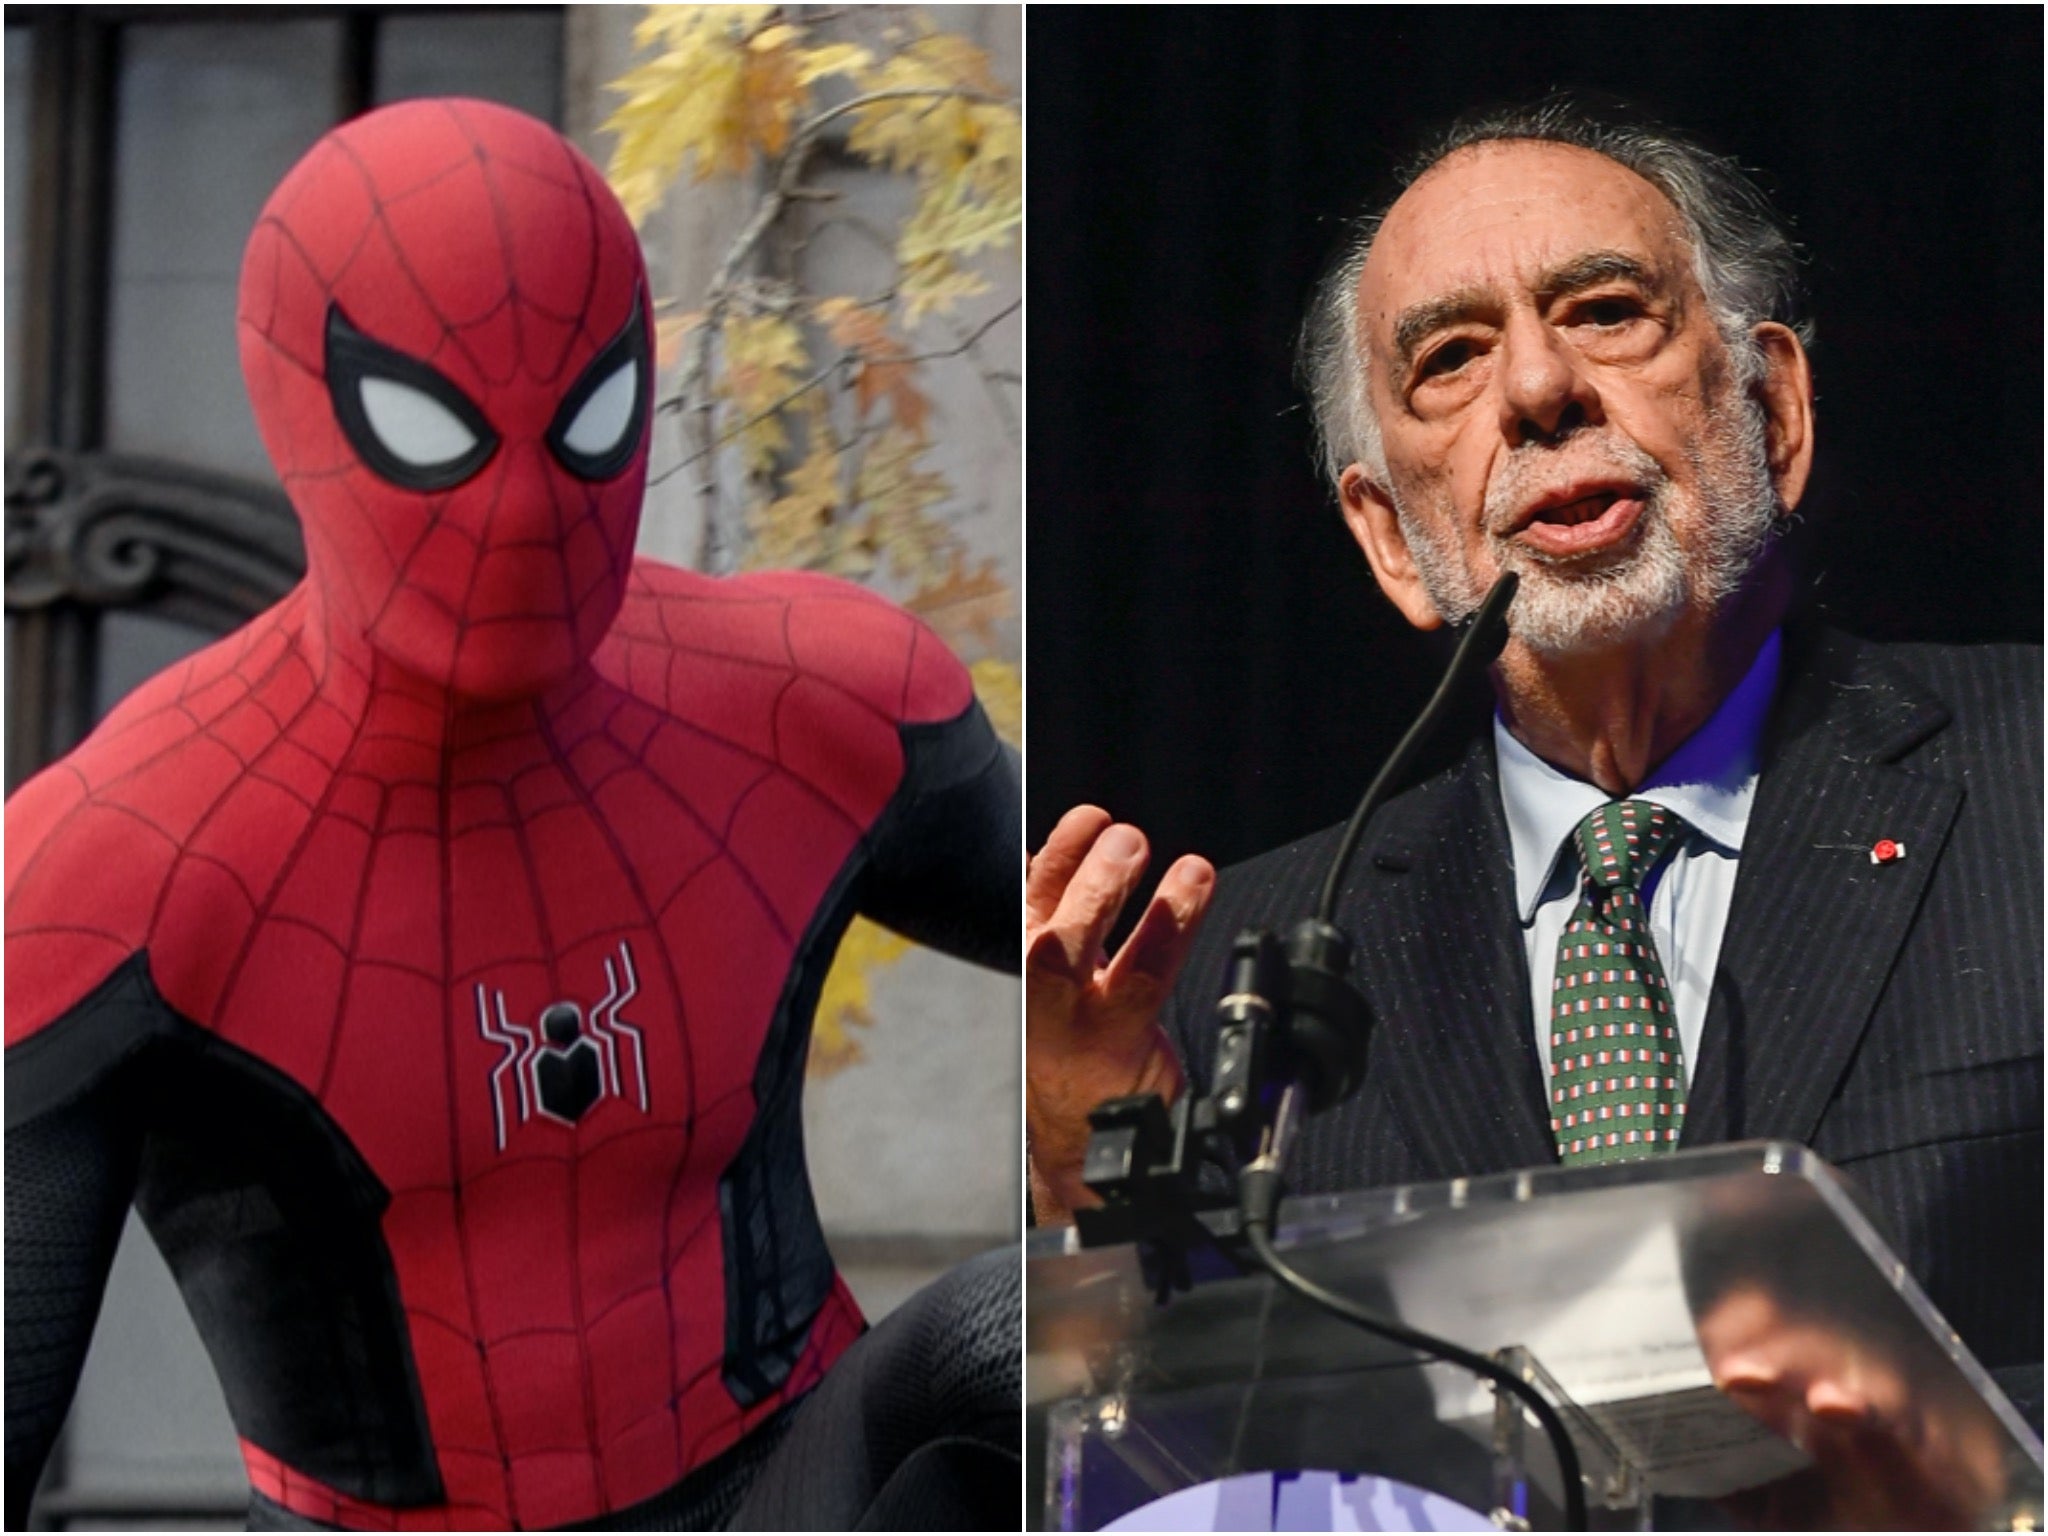 ‘Spider-Man: No Way Home’ and Francis Ford Coppola